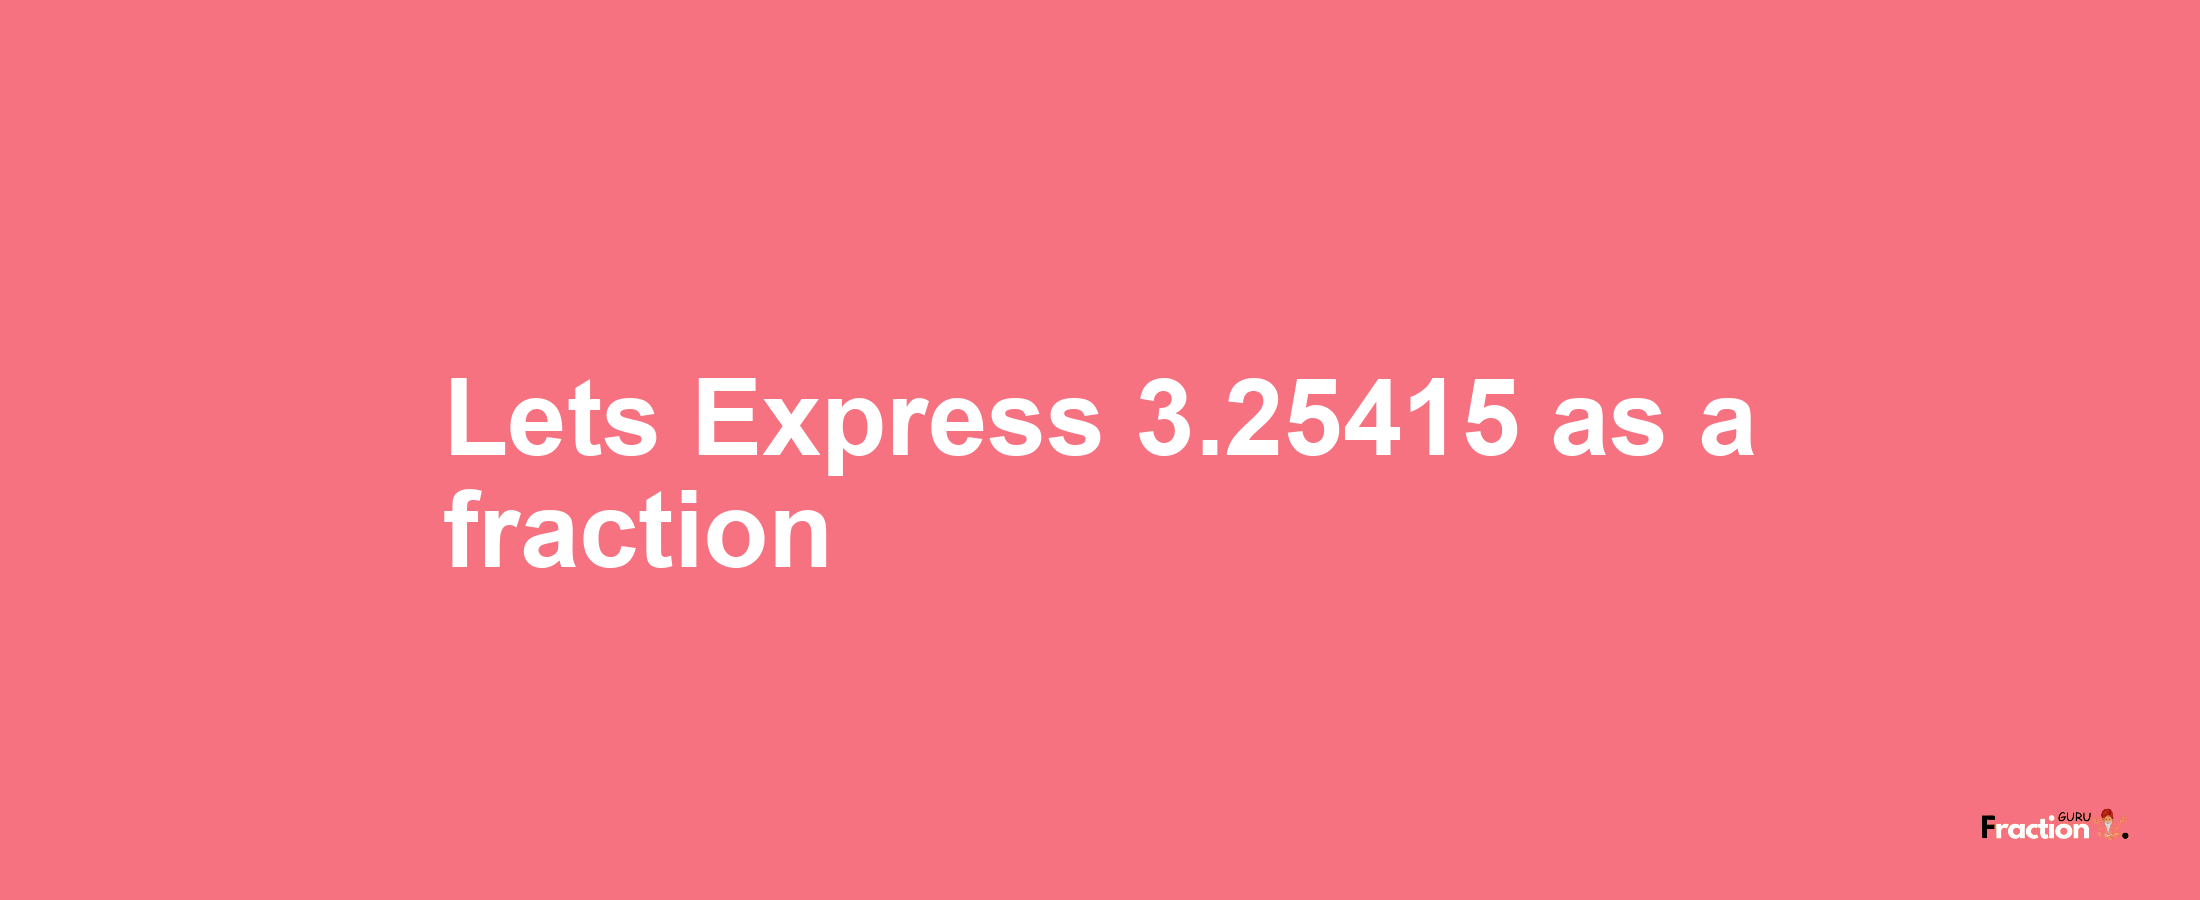 Lets Express 3.25415 as afraction